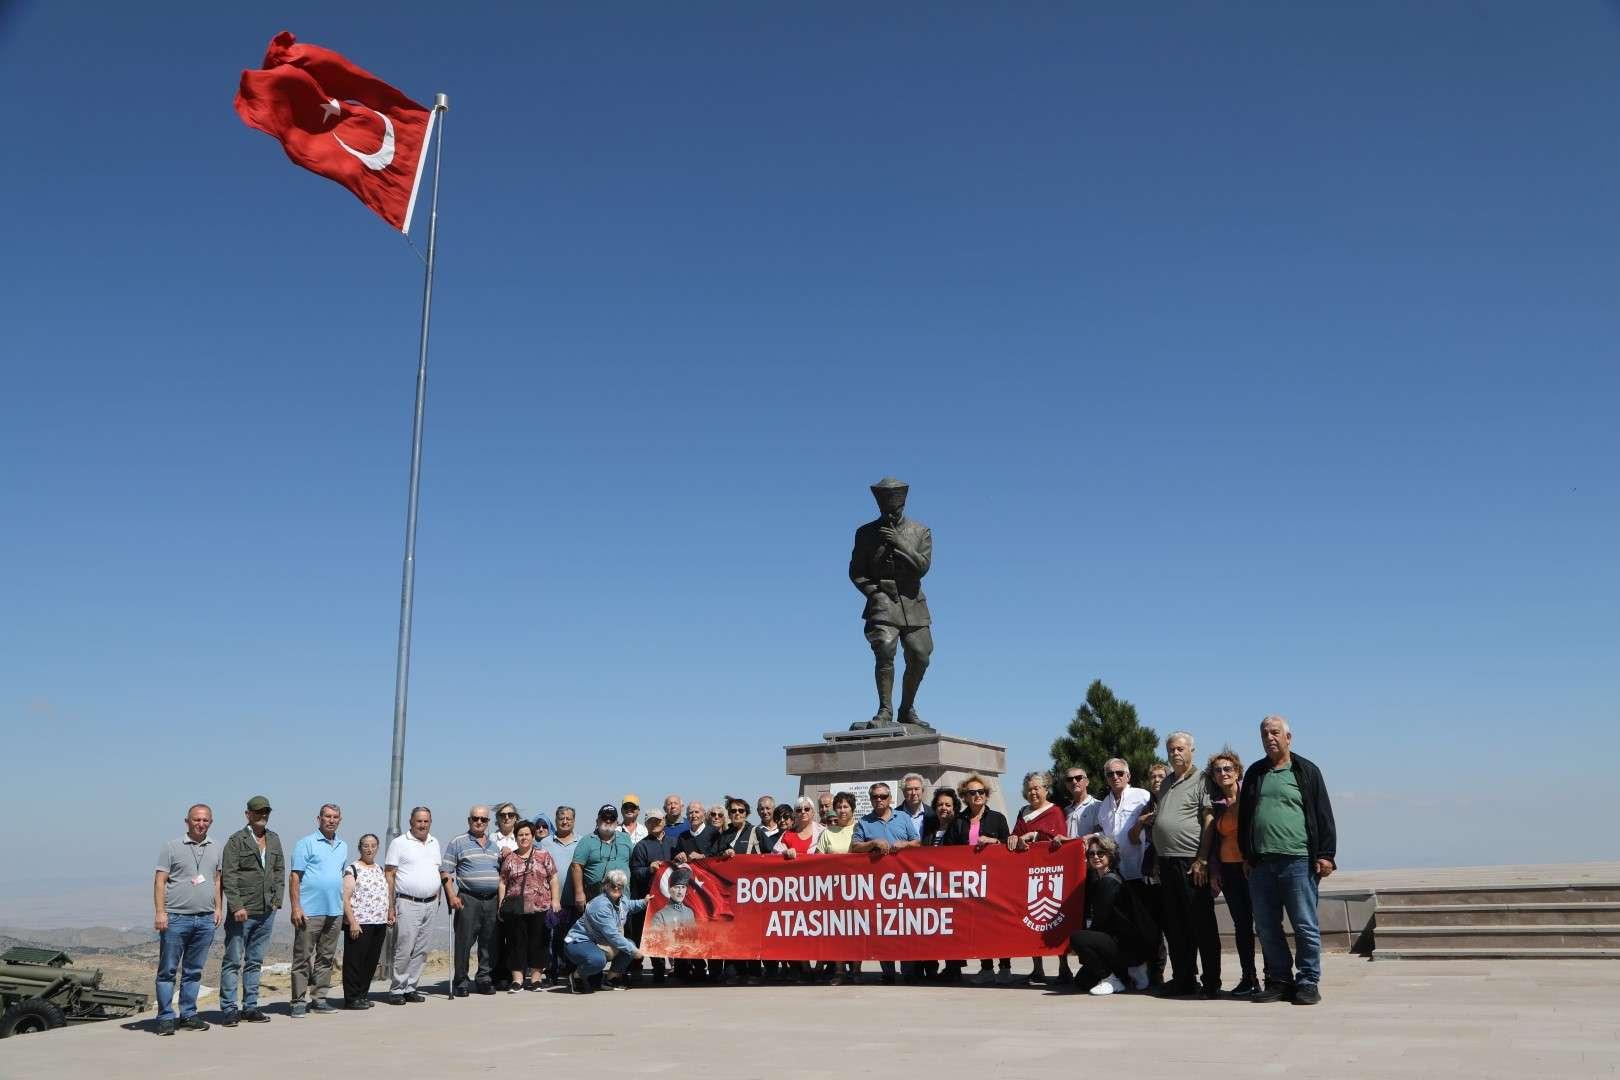 BODRUM'S VETERANS ARE FOLLOWING IN THE FOOTSTEPS OF THE FOUNDING LEADER OF OUR COUNTRY